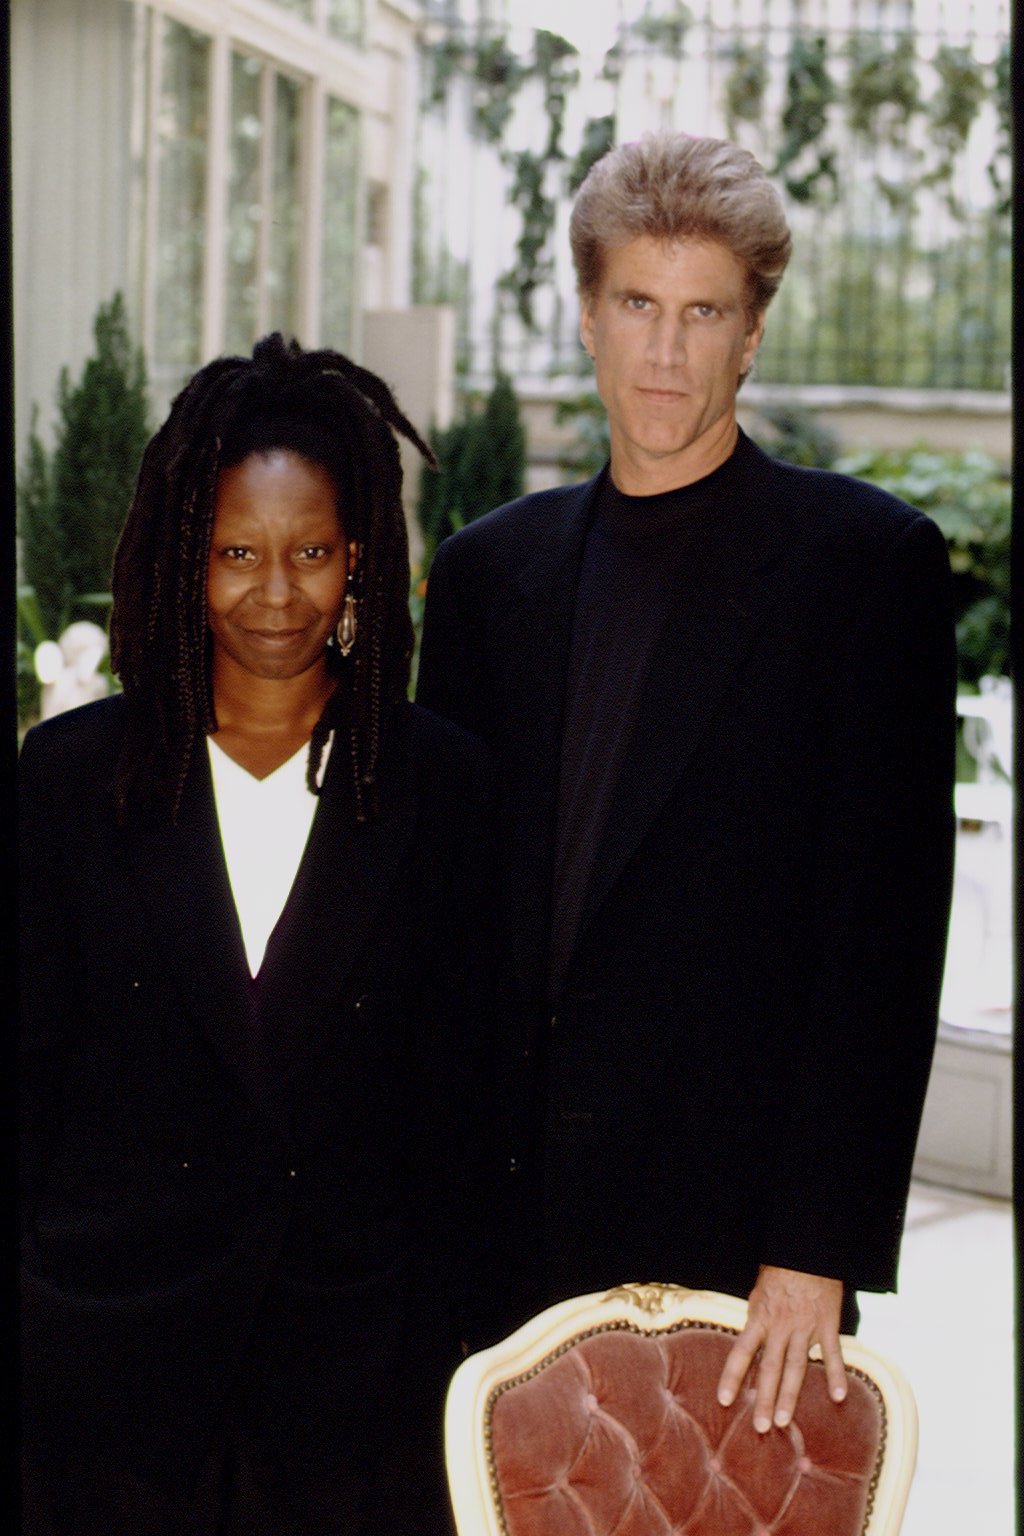 Whoopi Goldberg And Ted Danson At The Ritz Hotel in 1993. | Source: Getty Images